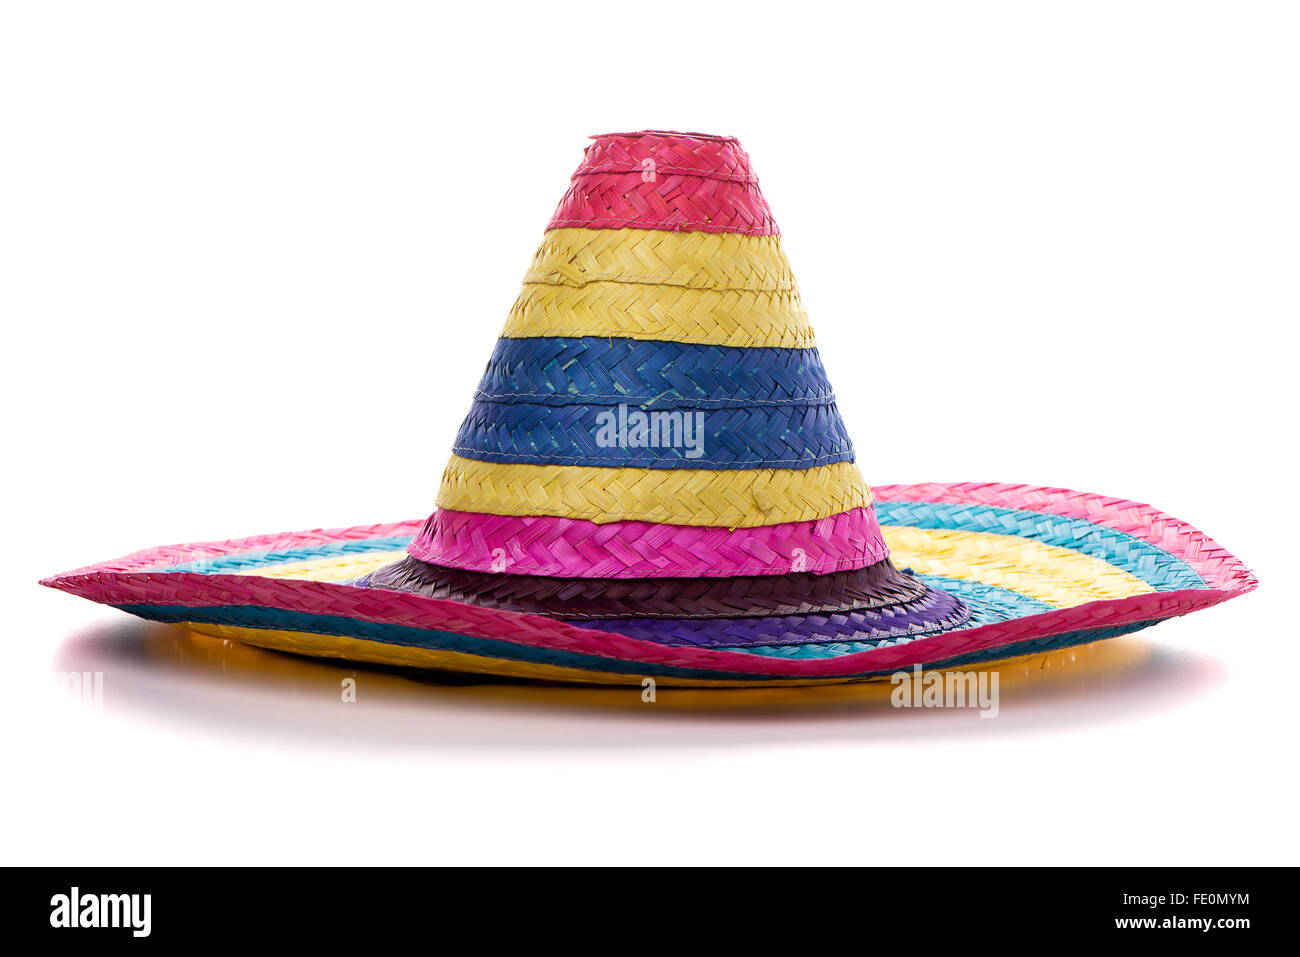 Colorful mexican sombrero on a white background. Stock Photo